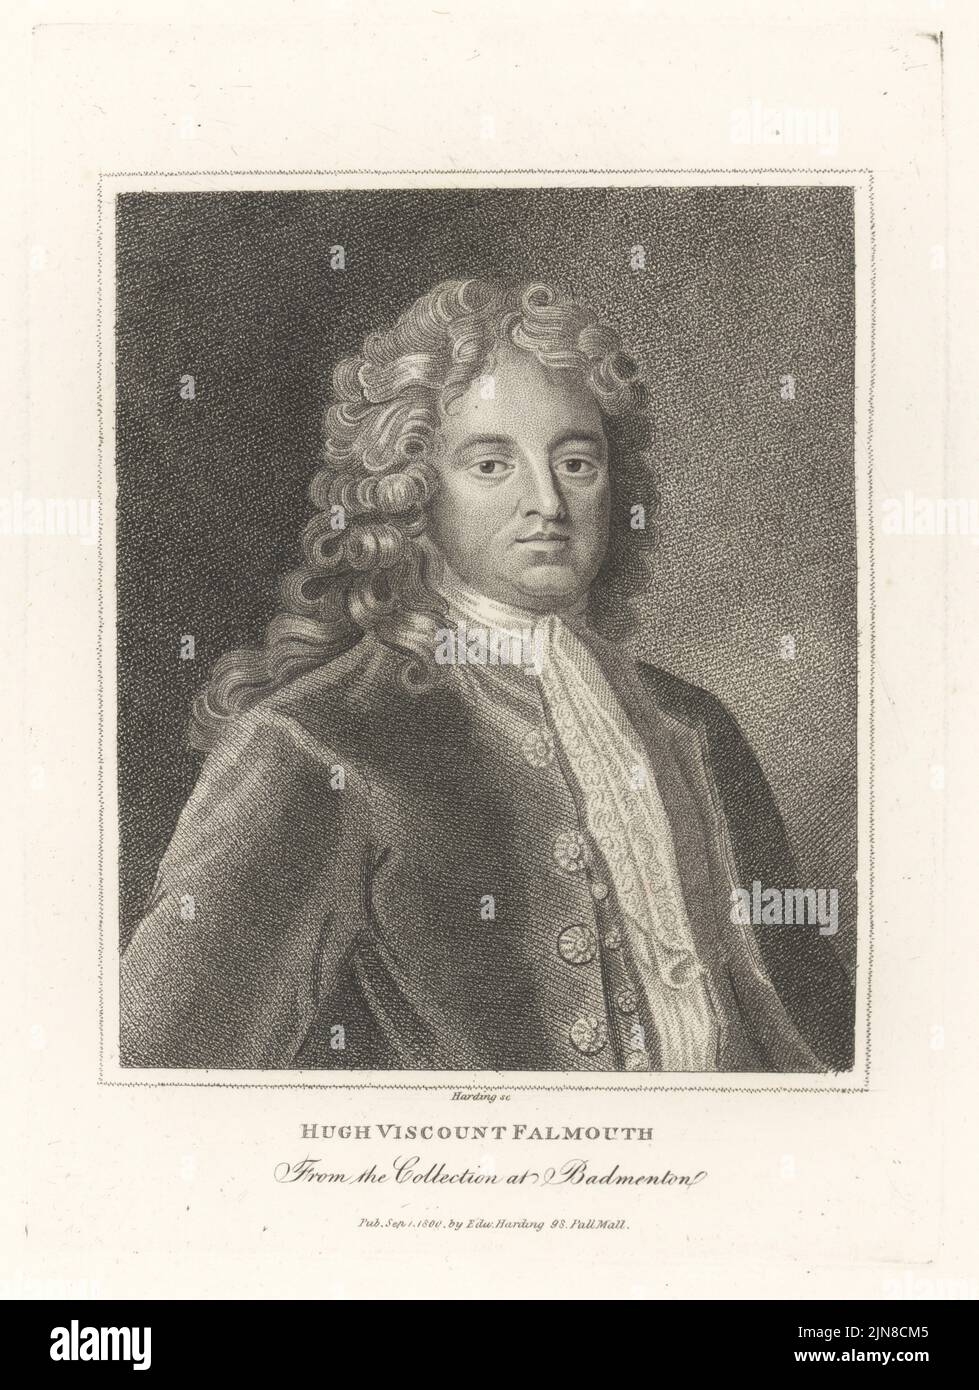 Hugh Boscawen, 1st Viscount Falmouth, English Whig politician, Comptroller to the household of King George I. 1678-1734. Hugh, Viscount Falmouth. In wig, cravat and coat. From the collection ot Badminton. Copperplate engraving by Edward Harding from John Adolphus’ The British Cabinet, containing Portraits of Illustrious Personages, printed by T. Bensley for E. Harding, 98 Pall Mall, London, 1800. Stock Photo